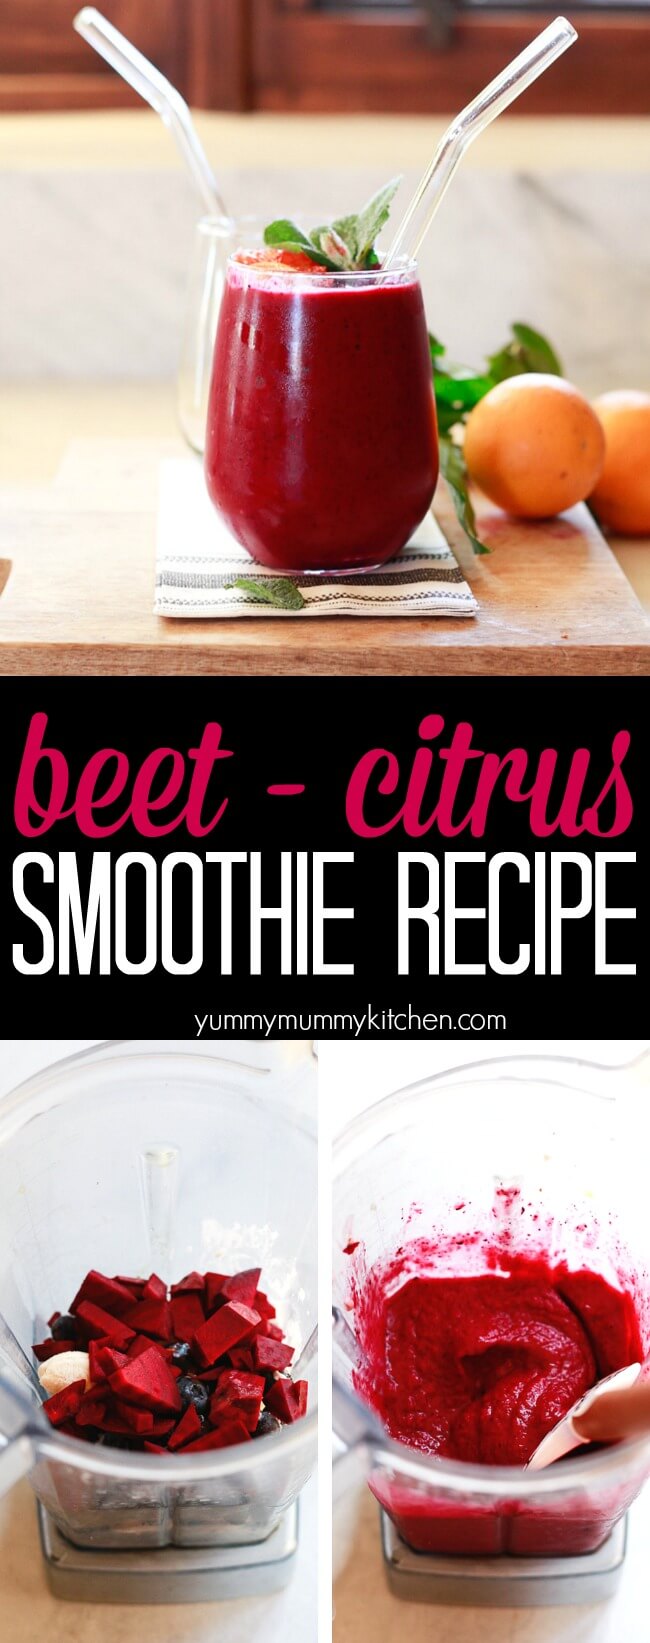 Delicious raw beet smoothie recipe made with berries and citrus in the Vitamix. A great super red anti-inflammatory smoothie for breakfast or snack. 